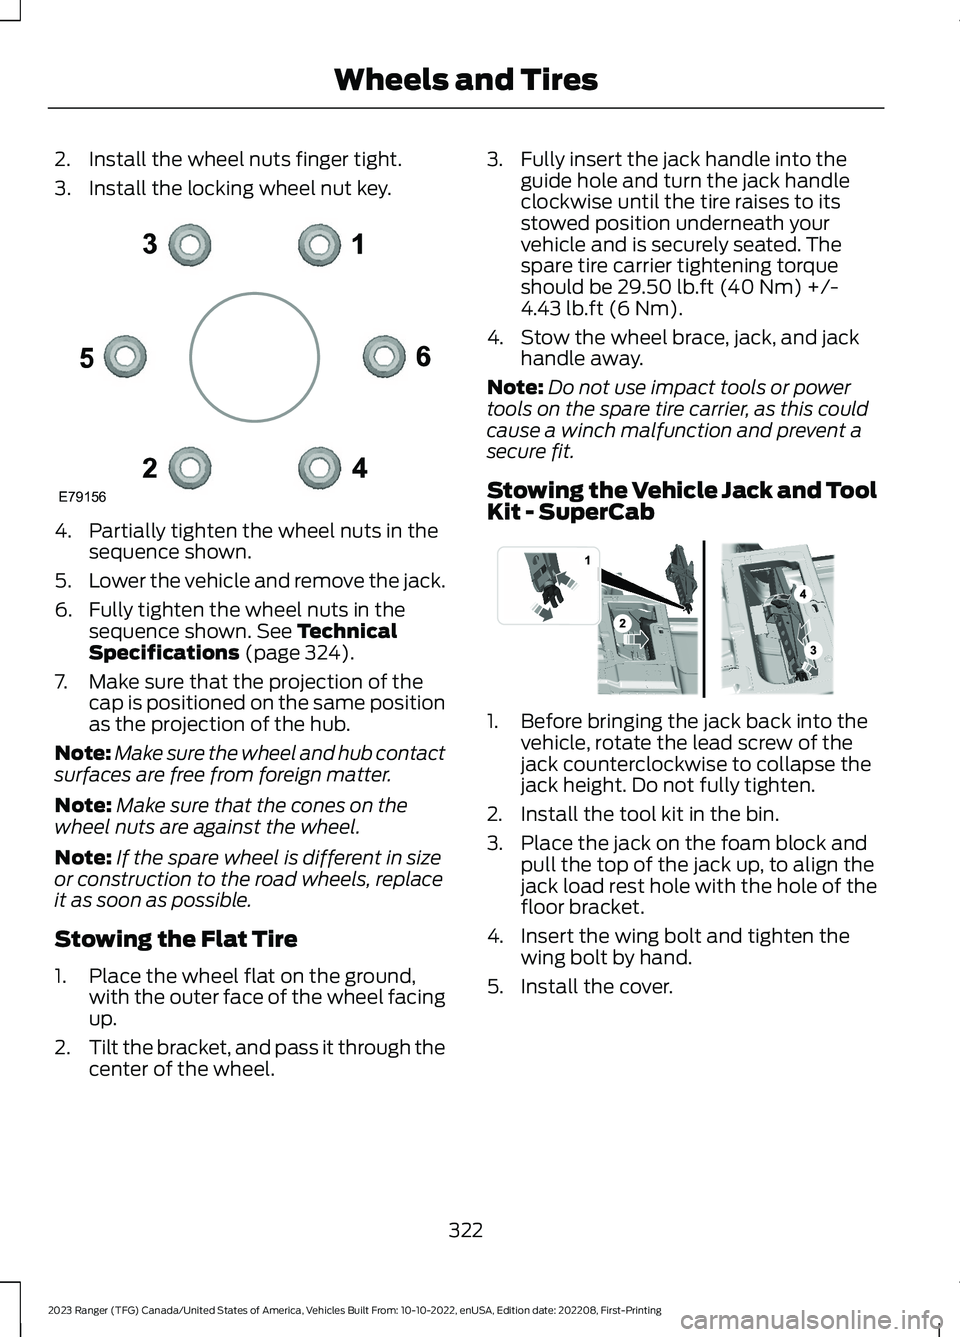 FORD RANGER 2023  Owners Manual 2.Install the wheel nuts finger tight.
3.Install the locking wheel nut key.
4.Partially tighten the wheel nuts in thesequence shown.
5.Lower the vehicle and remove the jack.
6.Fully tighten the wheel 